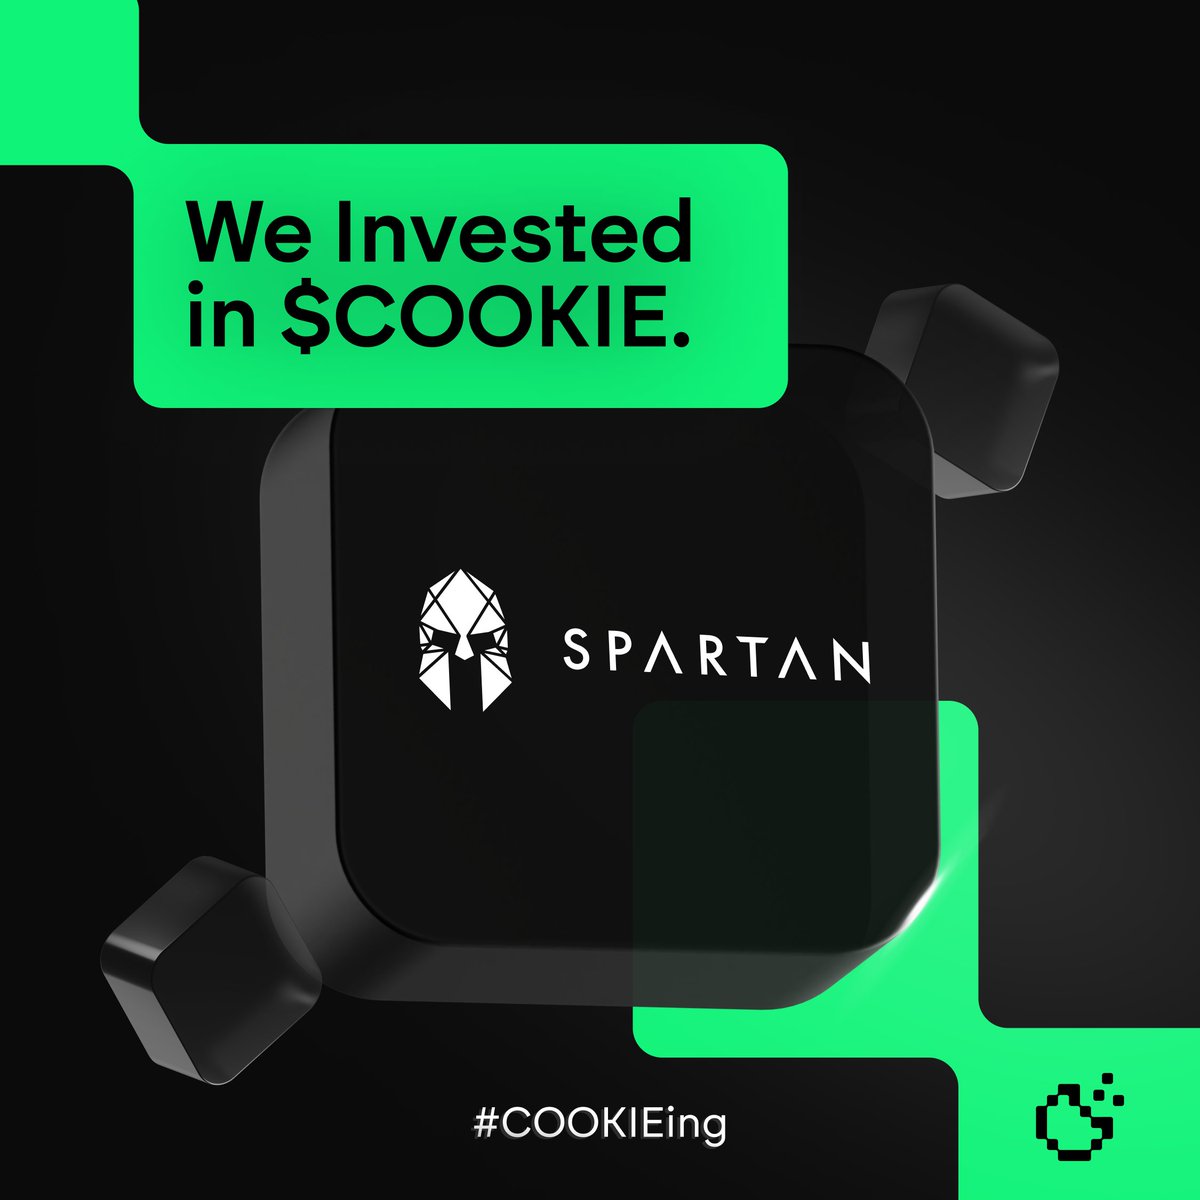 We are thrilled & proud to announce our investment in $COOKIE 🍪, powered by @Cookie3_com.

We look forward to supporting the biggest MarketingFi & AI Data Layer in Web3, used by over 300 dApps and 14.4B+ multichain transactions already processed.

#COOKIEing